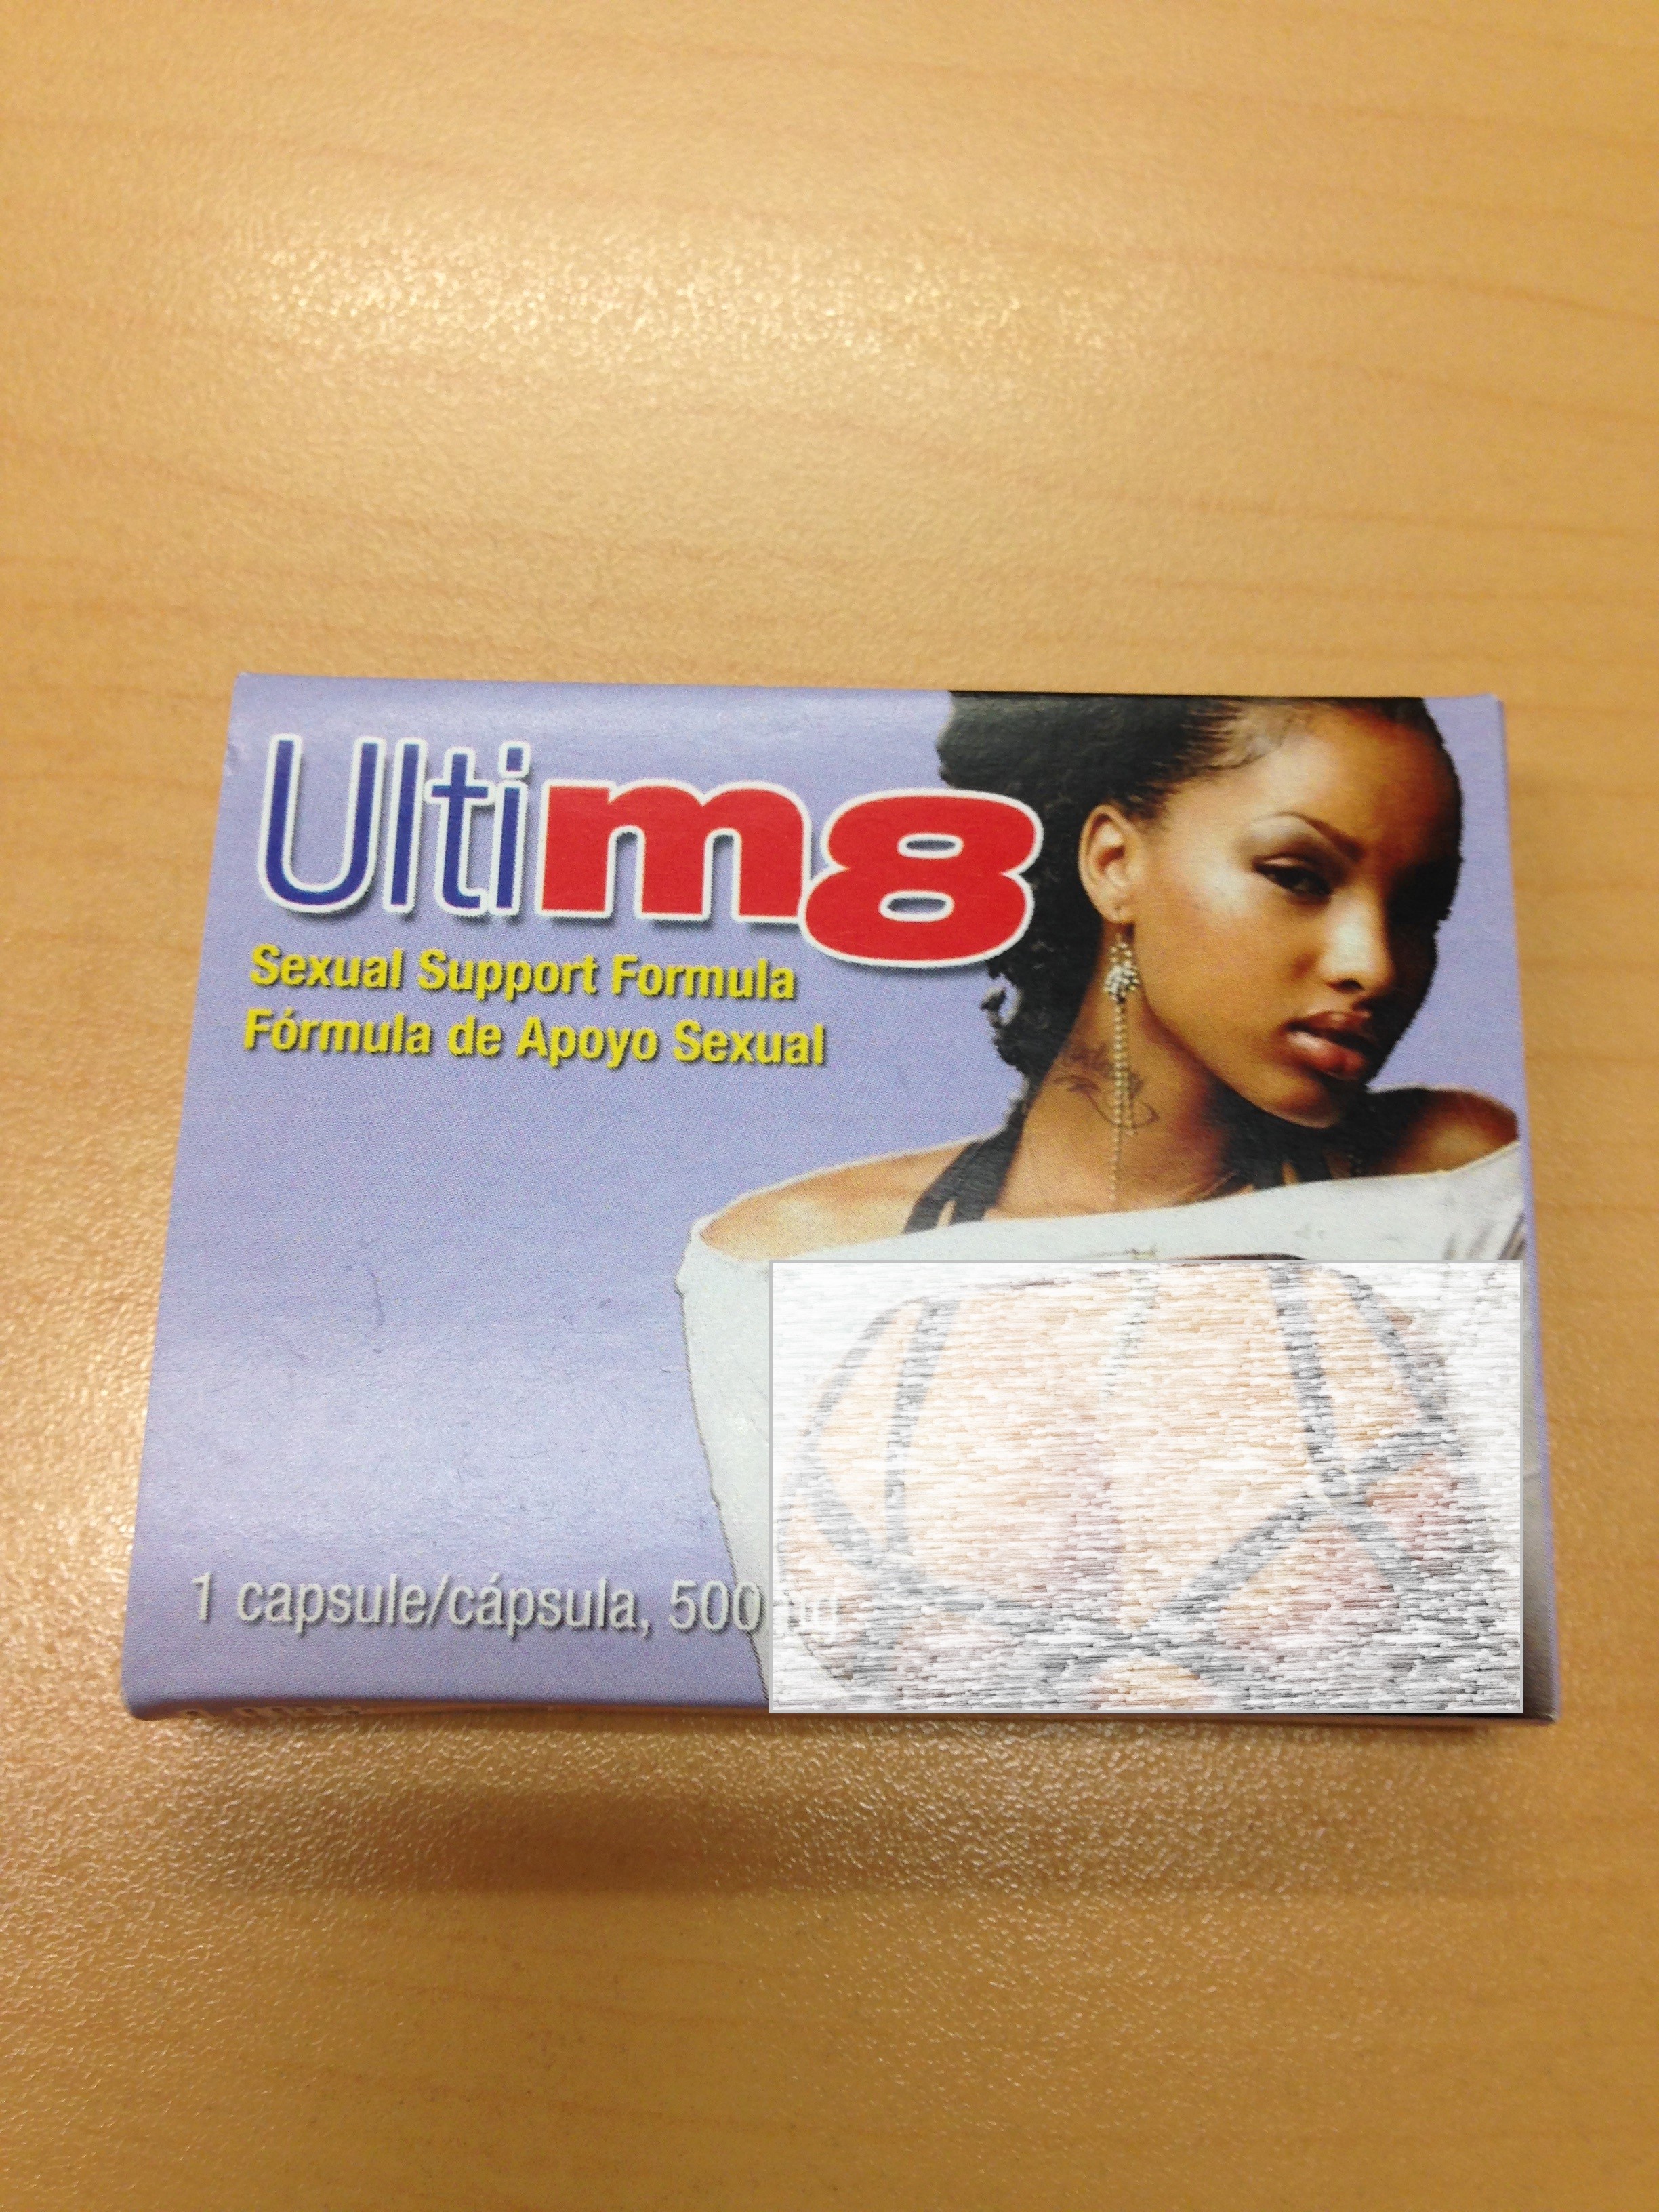 Image of the illigal product: Ultim8